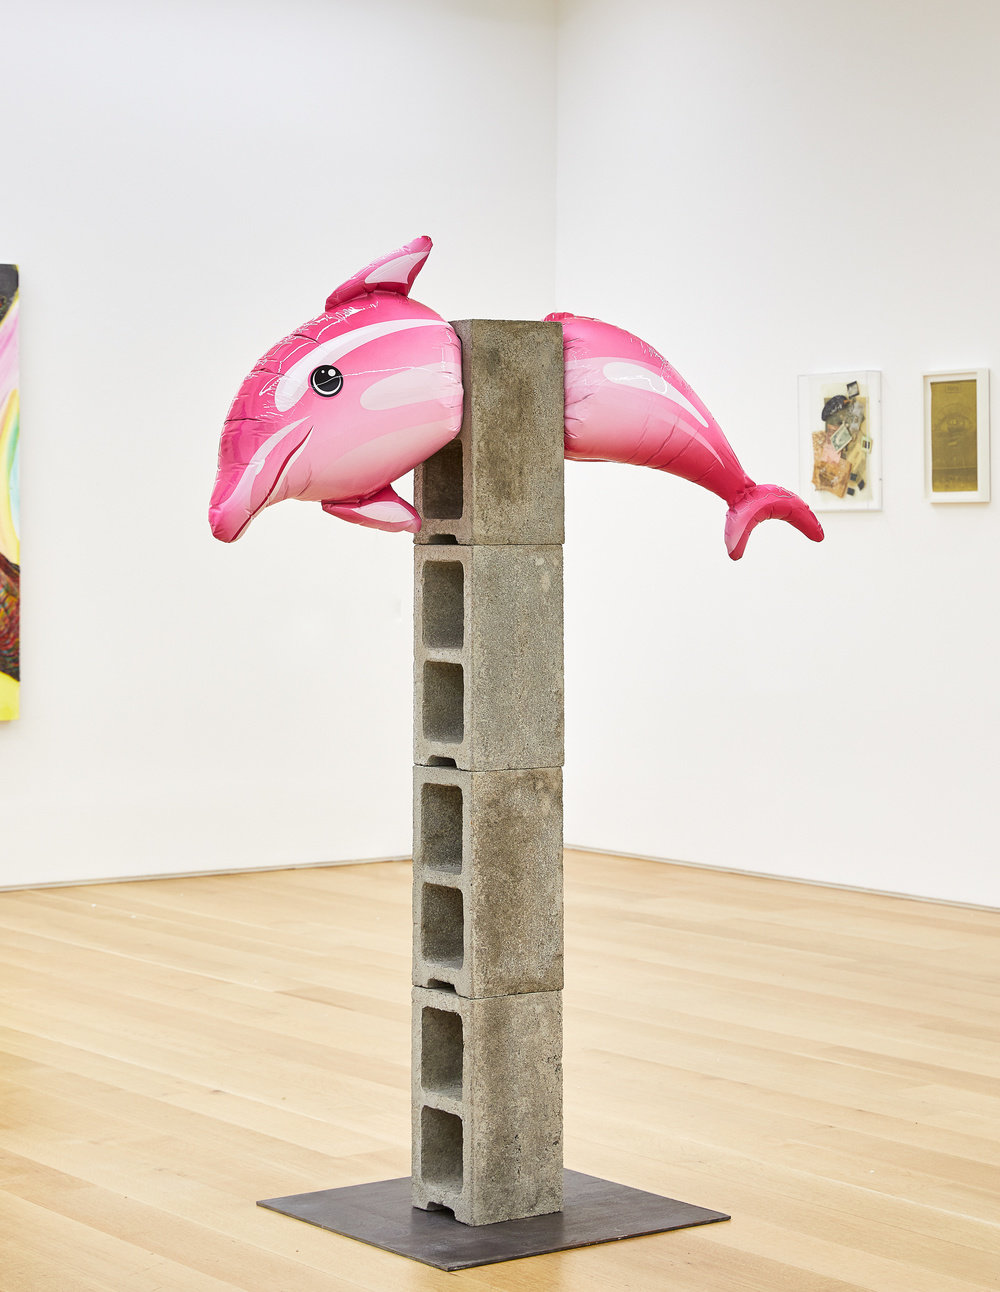 Adam parker smith, fearlessly the idiot faces the crowd, 2019, mixed media, 52 x 12 x 67 in., 132 x 30.5 x 170 cm